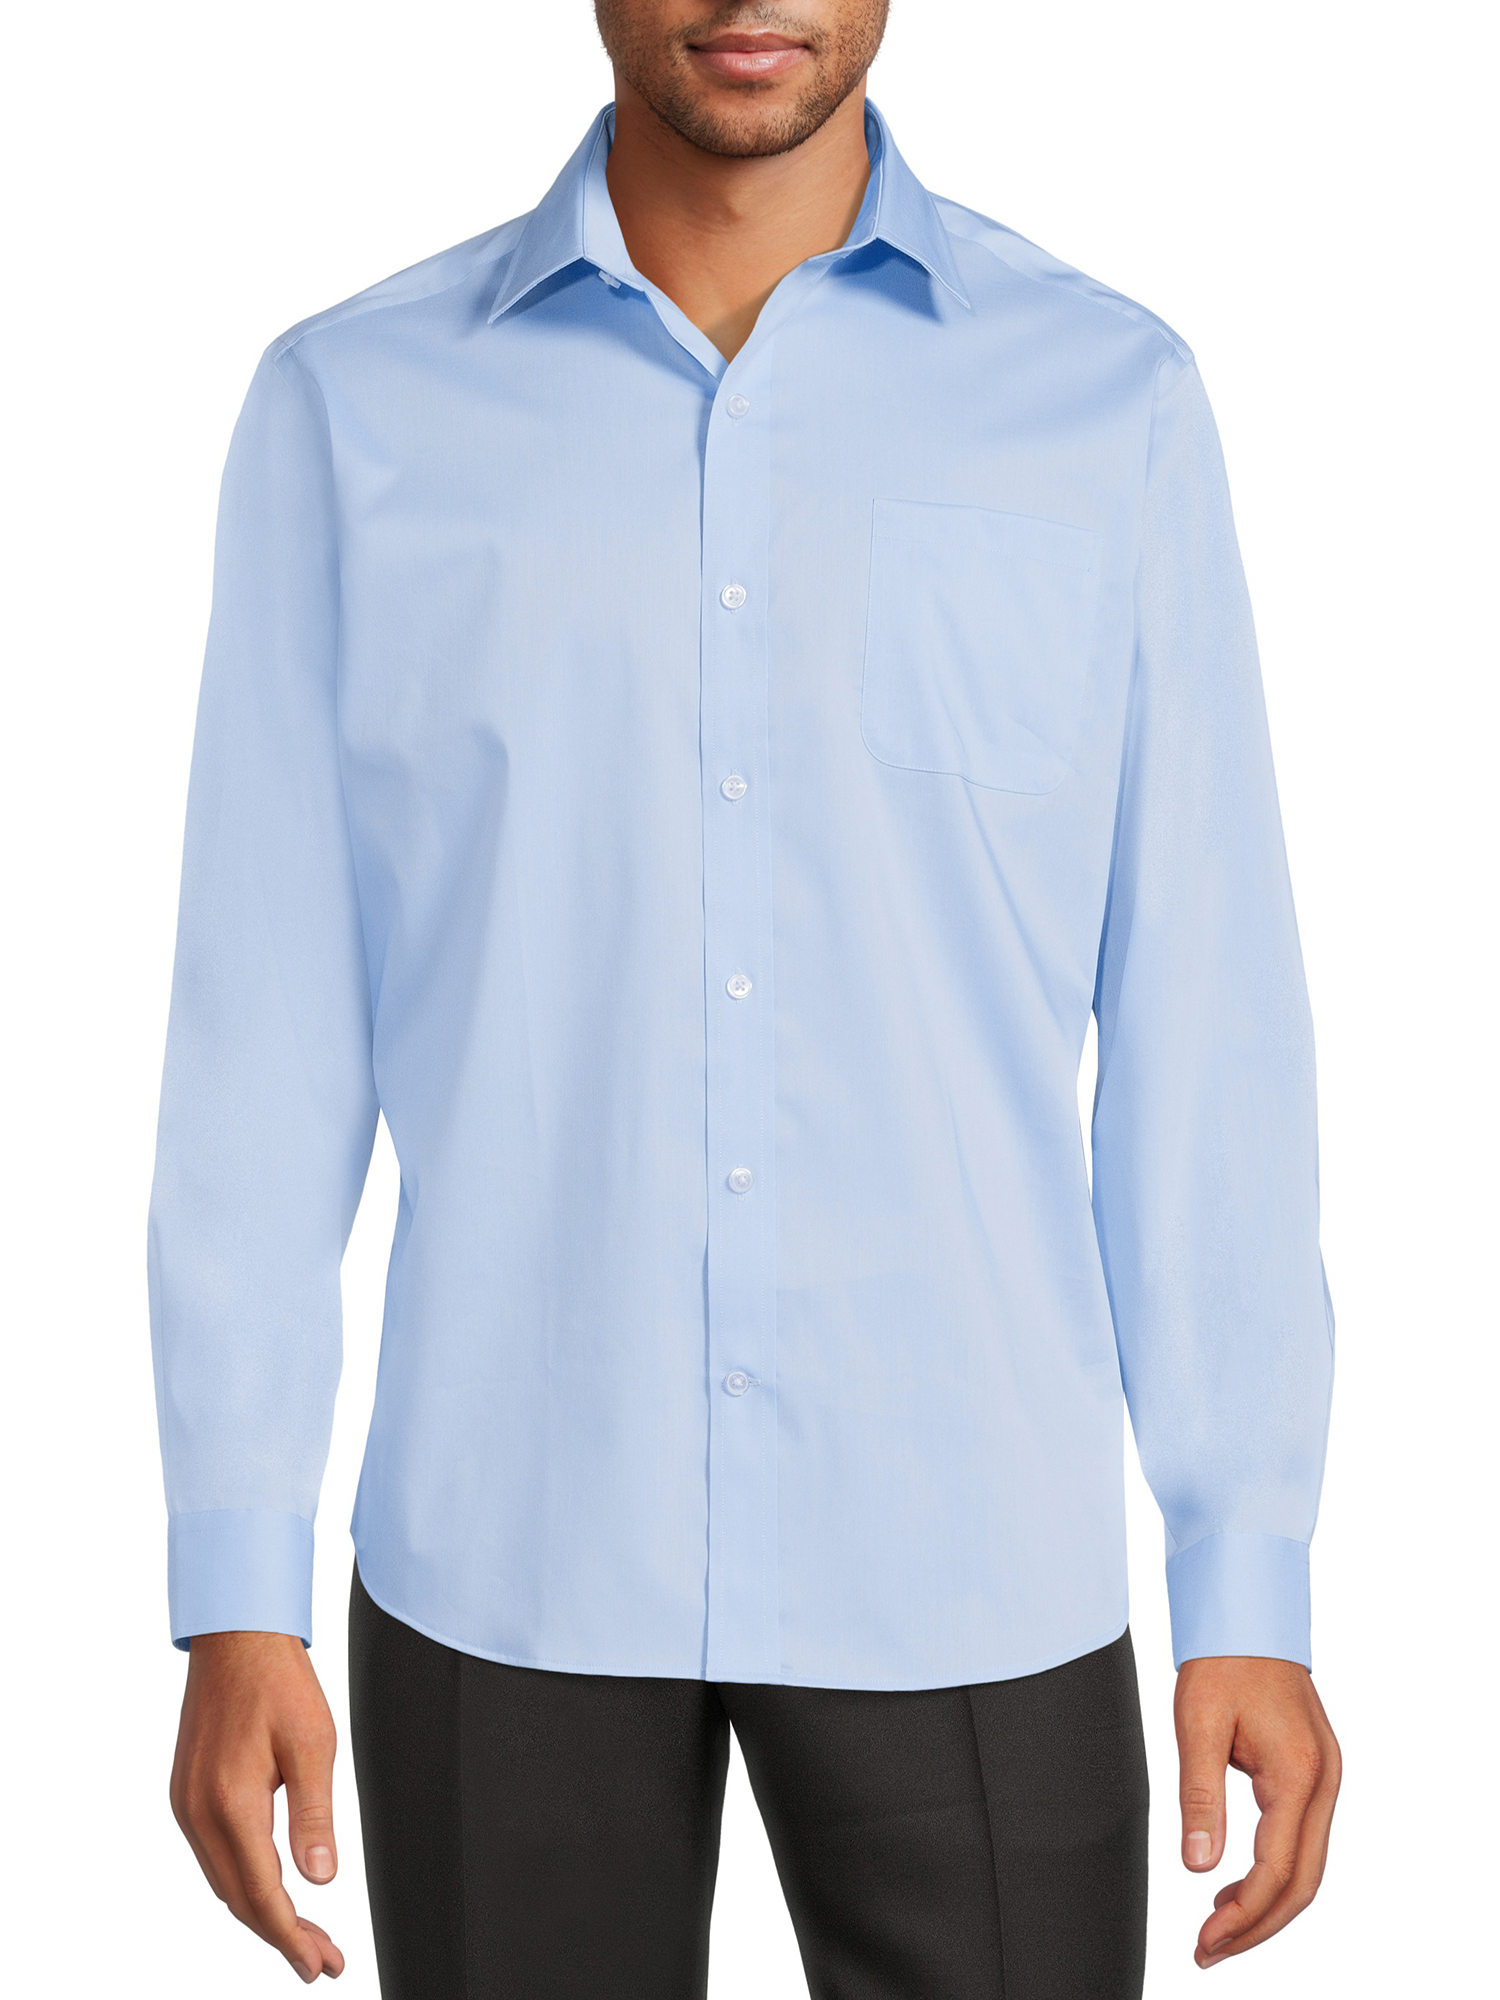 George Men's Classic Dress Shirt with Long Sleeves, Sizes S-3XL - image 1 of 5